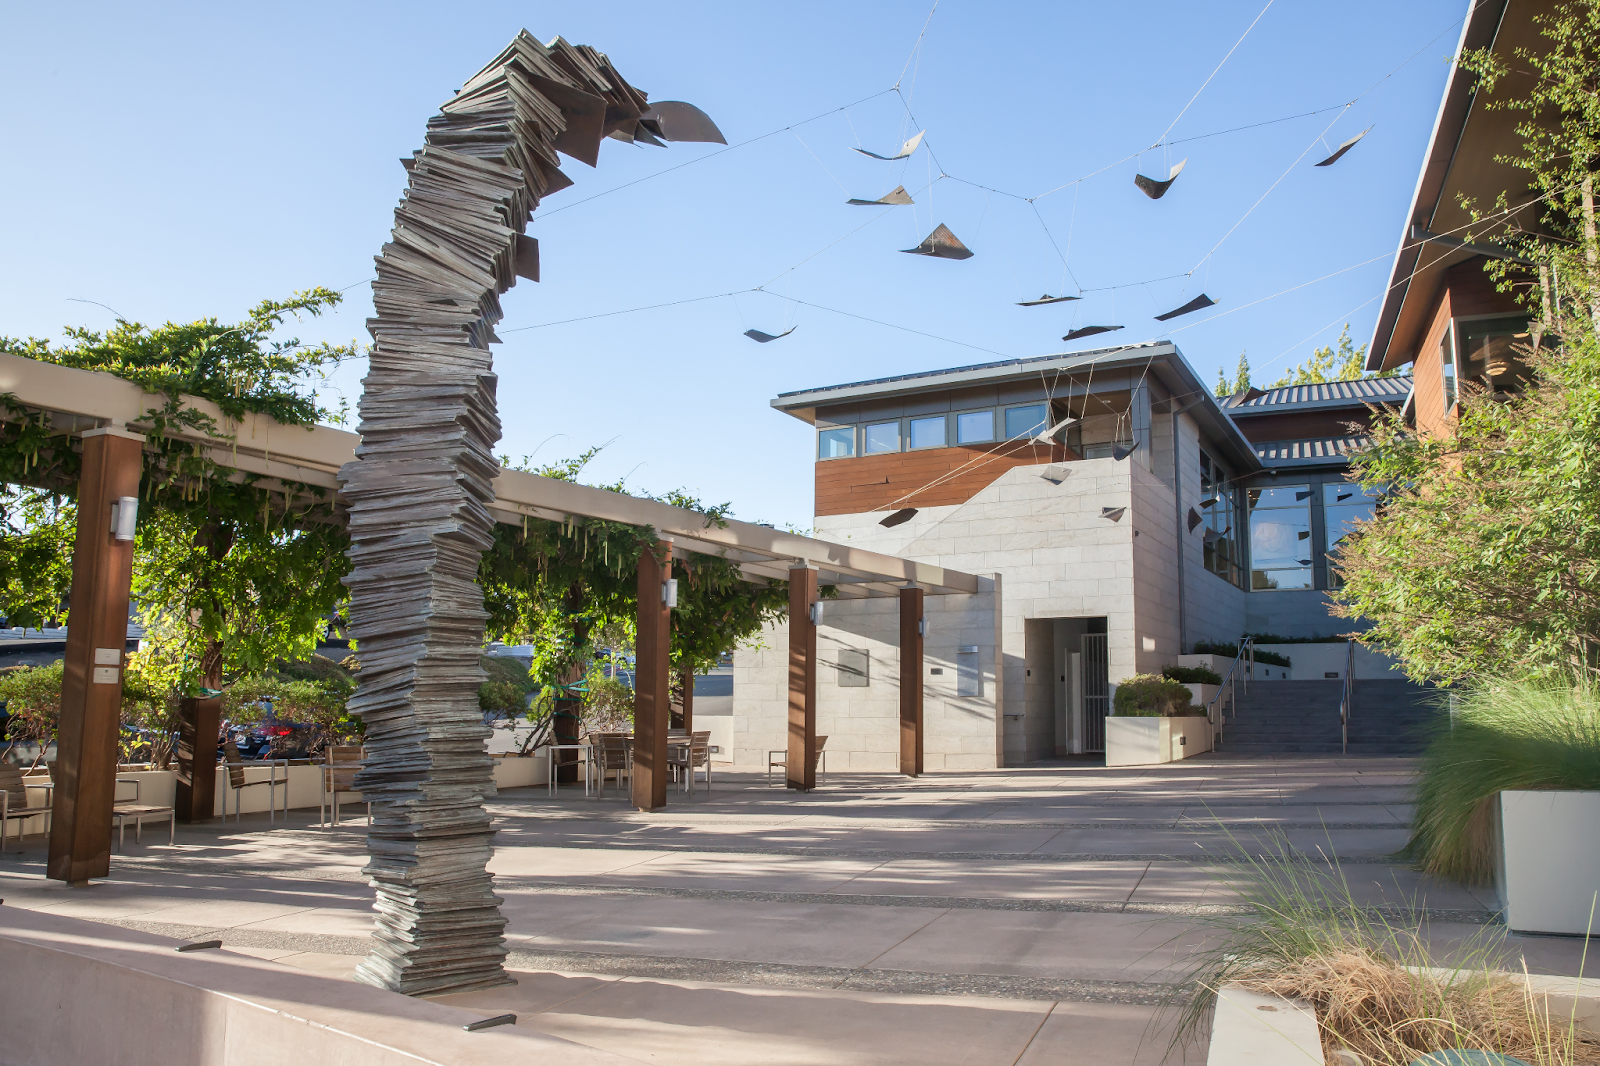 large bronze sculpture of pages outside of the Lafayette Library in California. Single bronze sheets of paper are suspended over an outdoor walkway on wires 